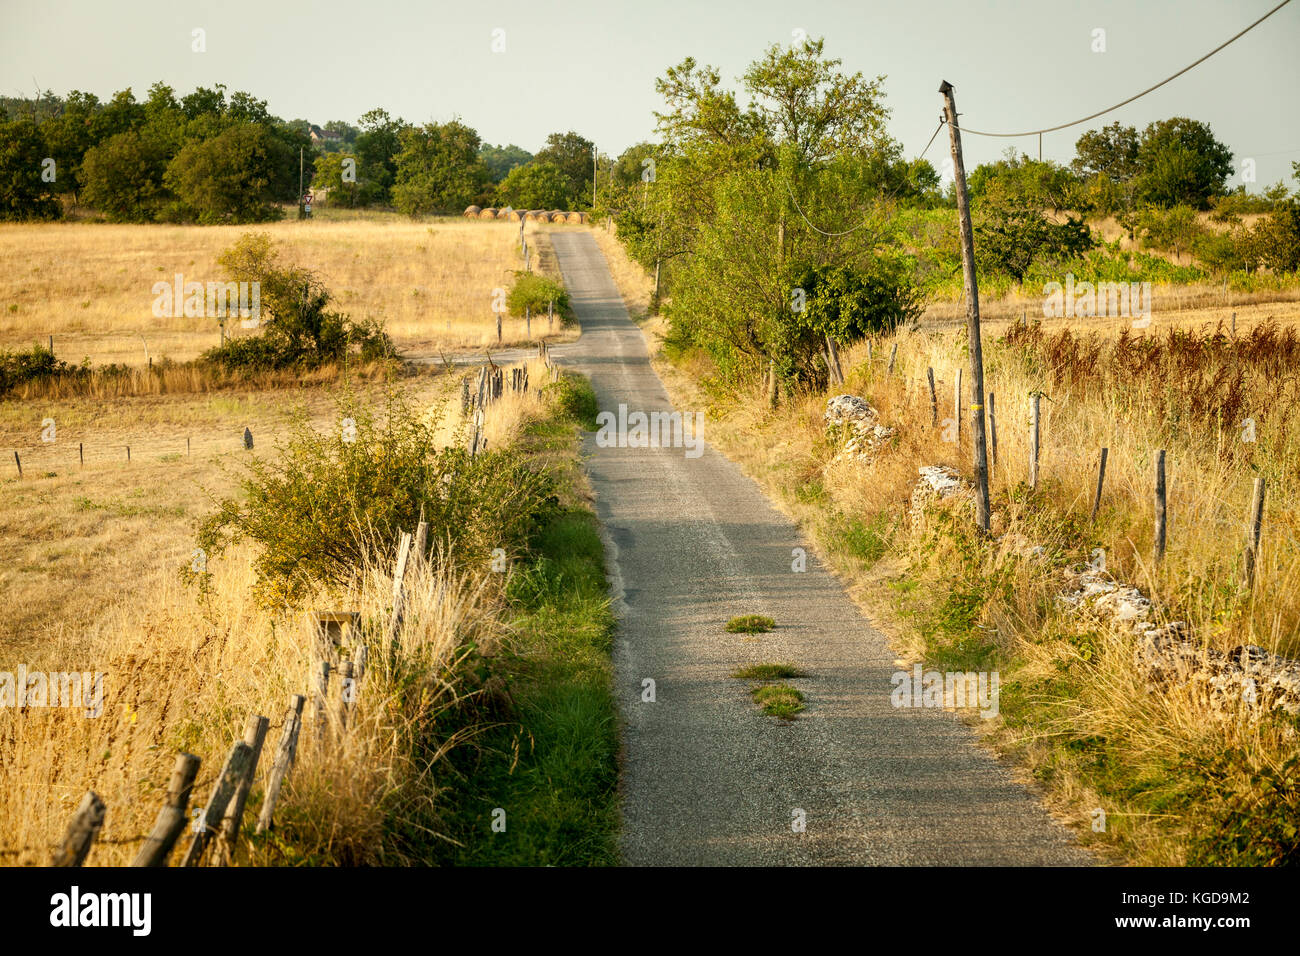 A country road disappears into the distance in Cahors, France Stock Photo